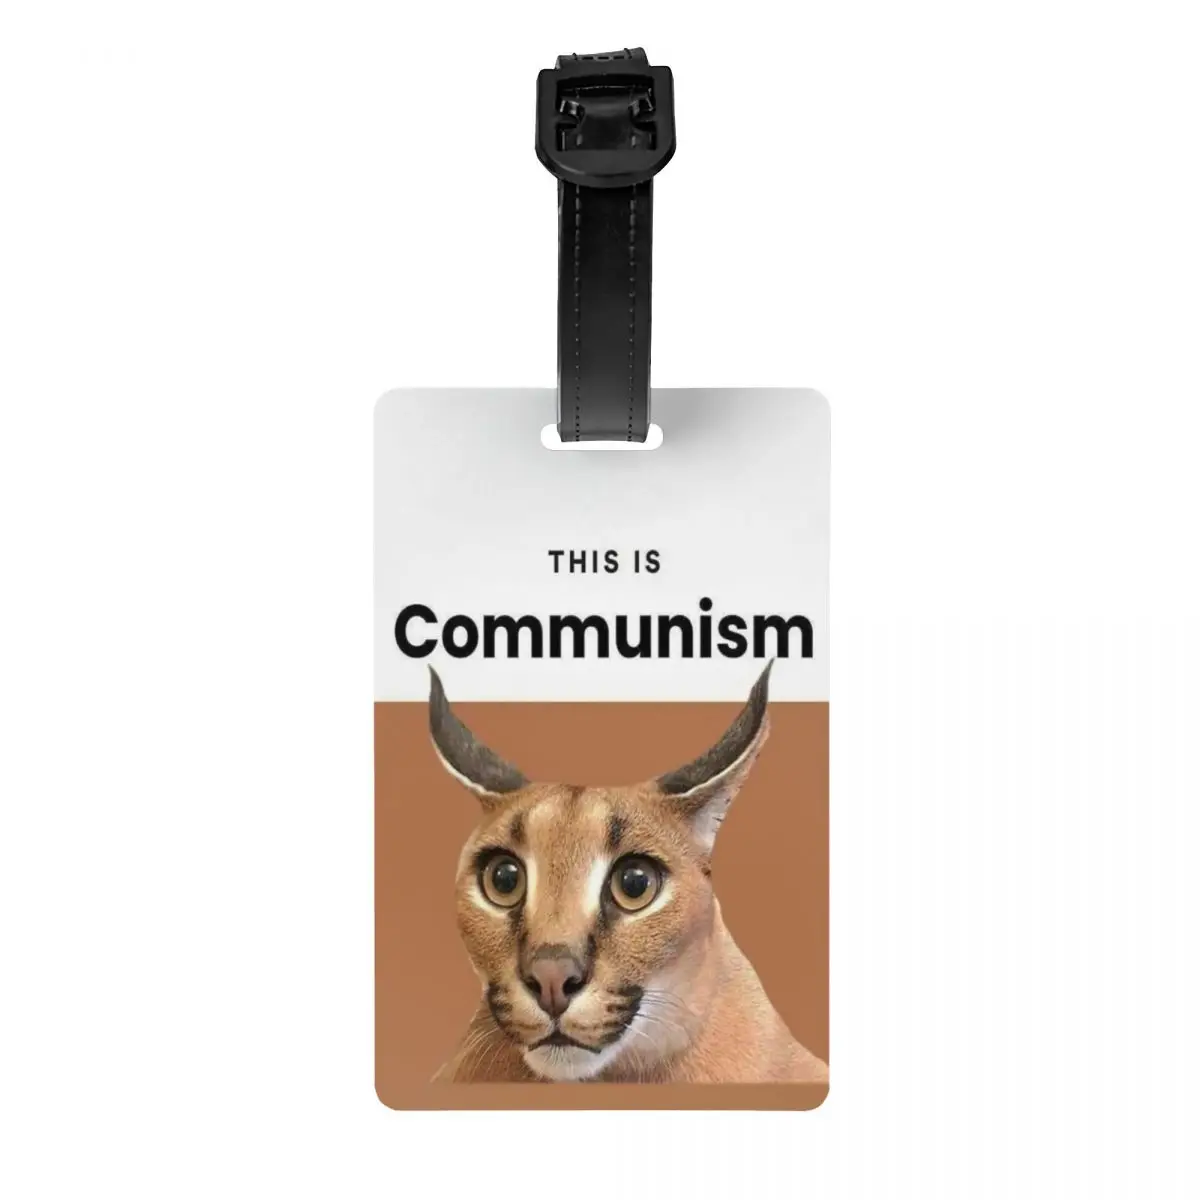 

Communism Floppa Cute Meme Luggage Tags for Travel Suitcase Caracal Cat Privacy Cover Name ID Card